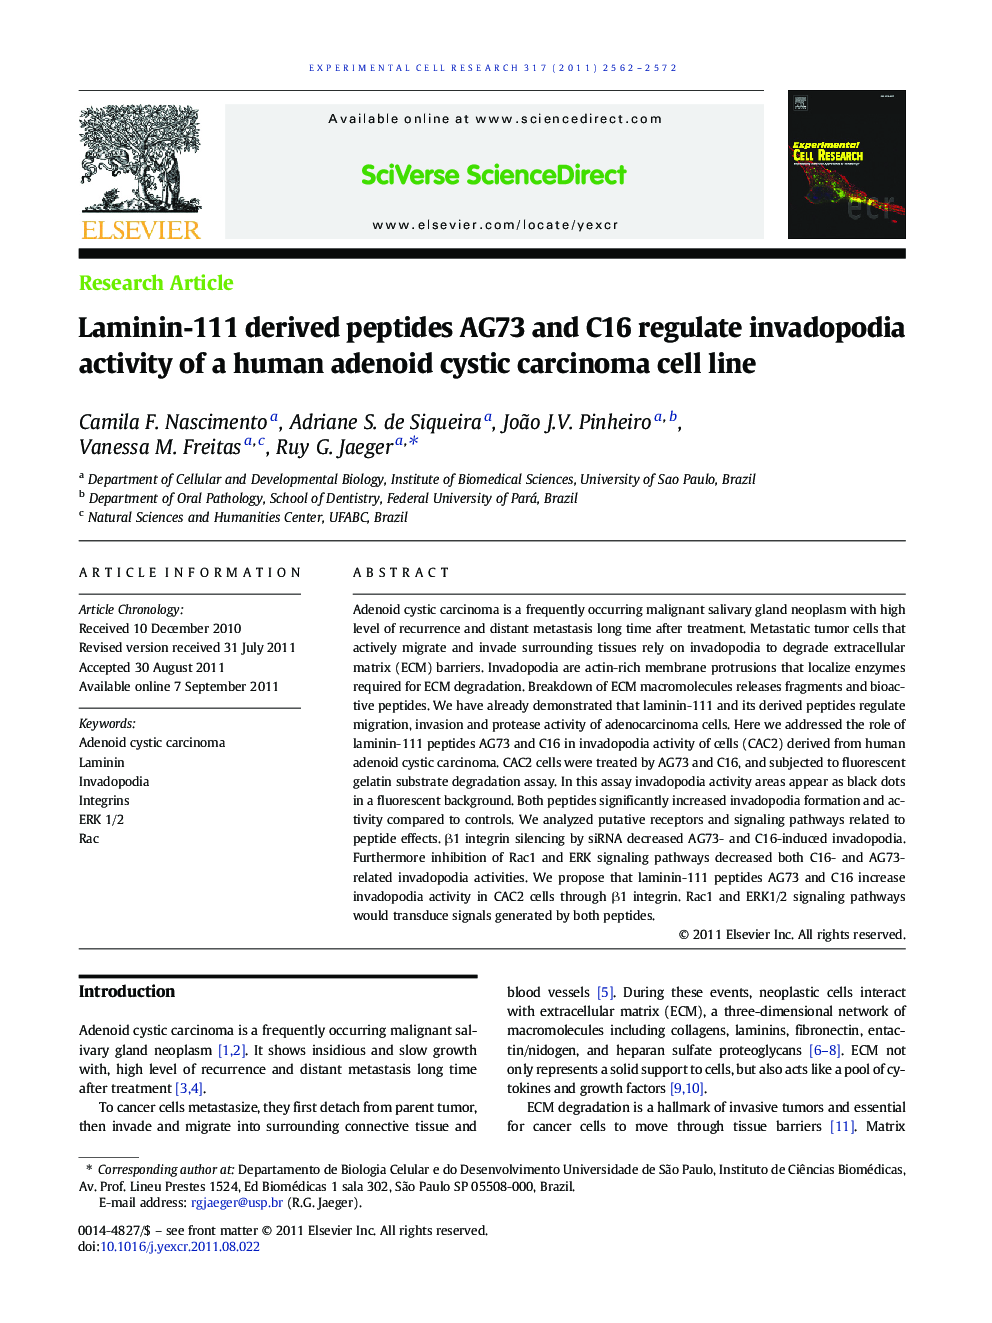 Laminin-111 derived peptides AG73 and C16 regulate invadopodia activity of a human adenoid cystic carcinoma cell line